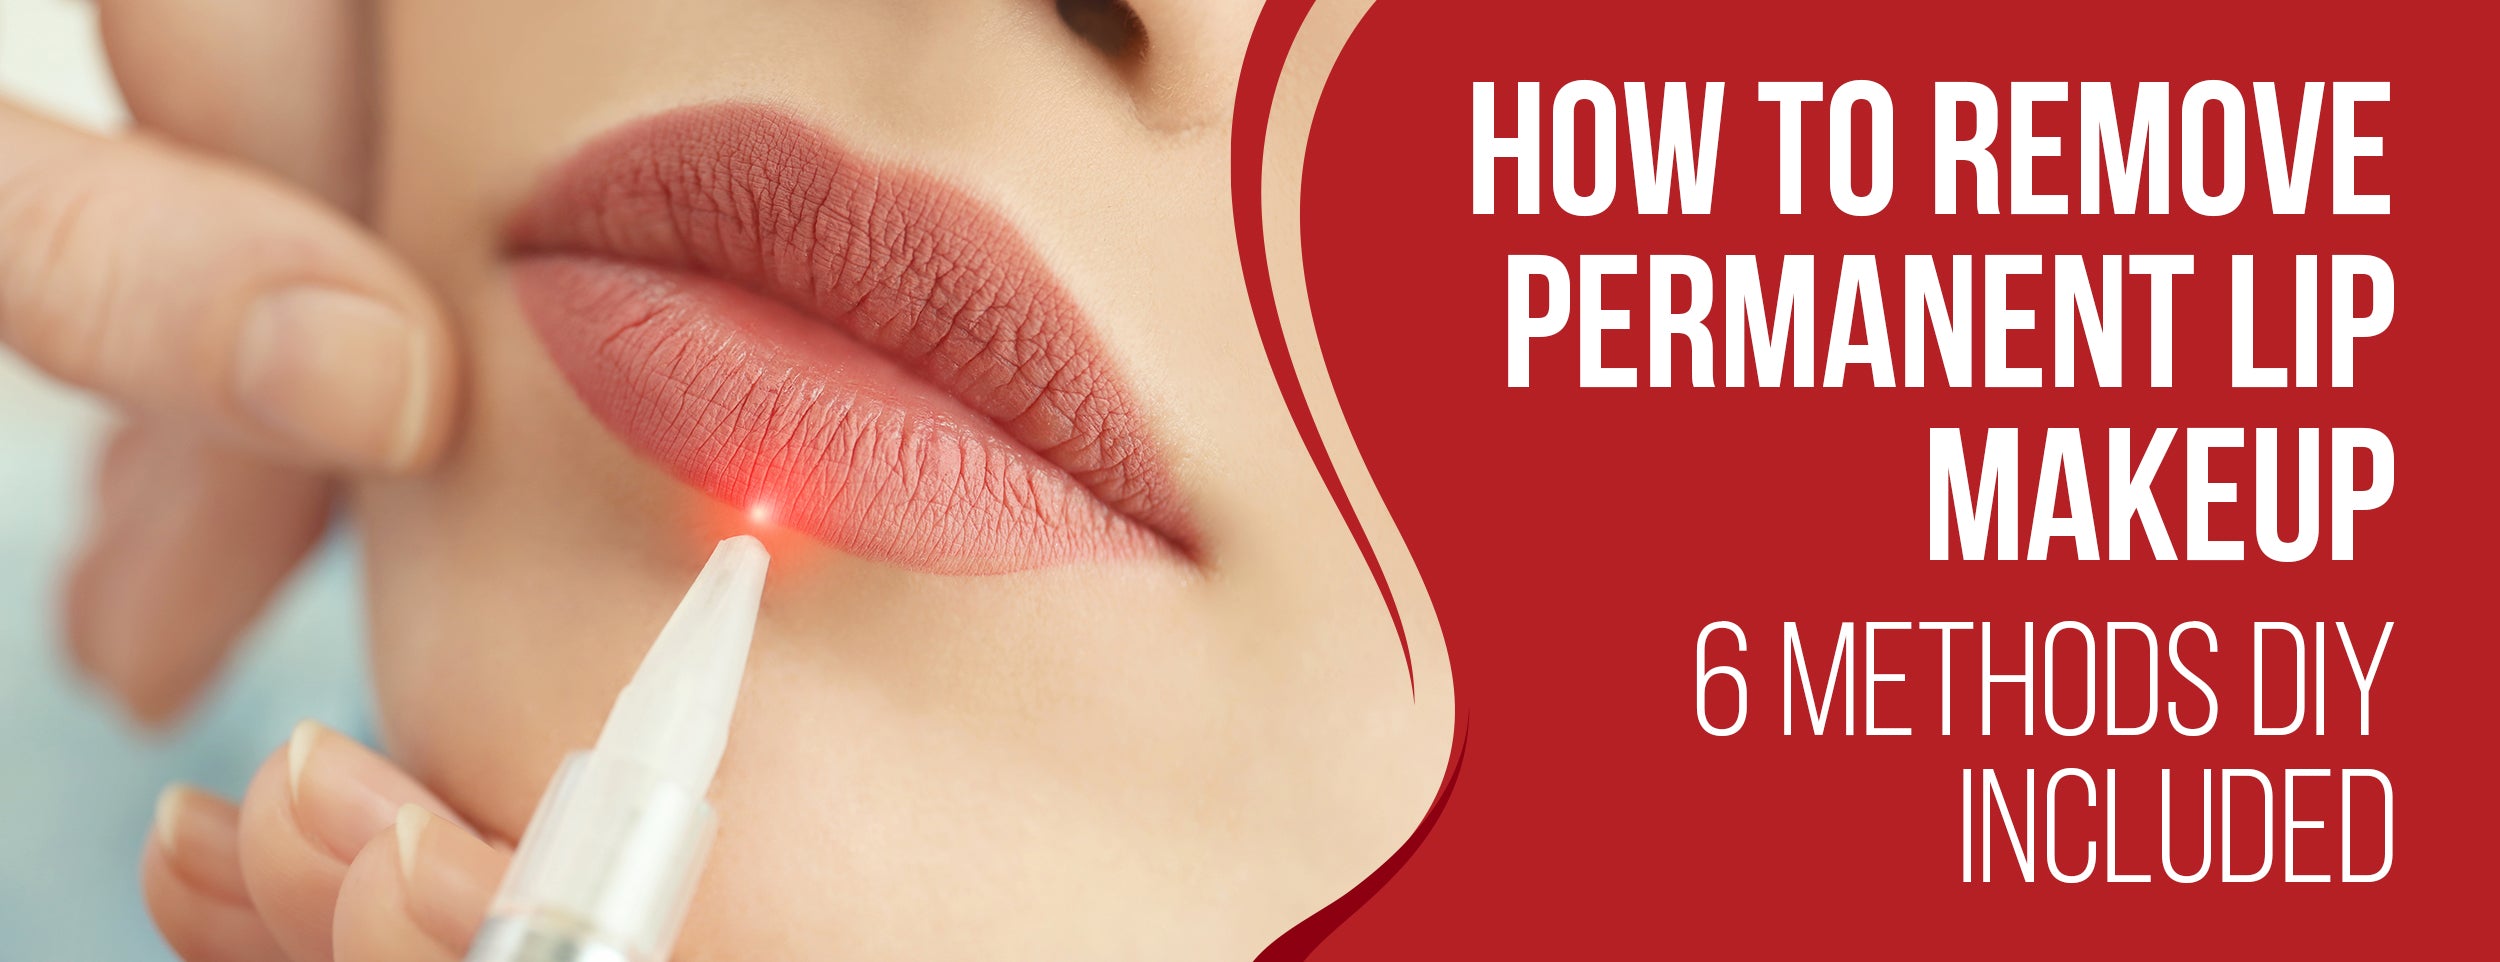 How to Remove Permanent Lip Makeup 6 Methods DIY Included